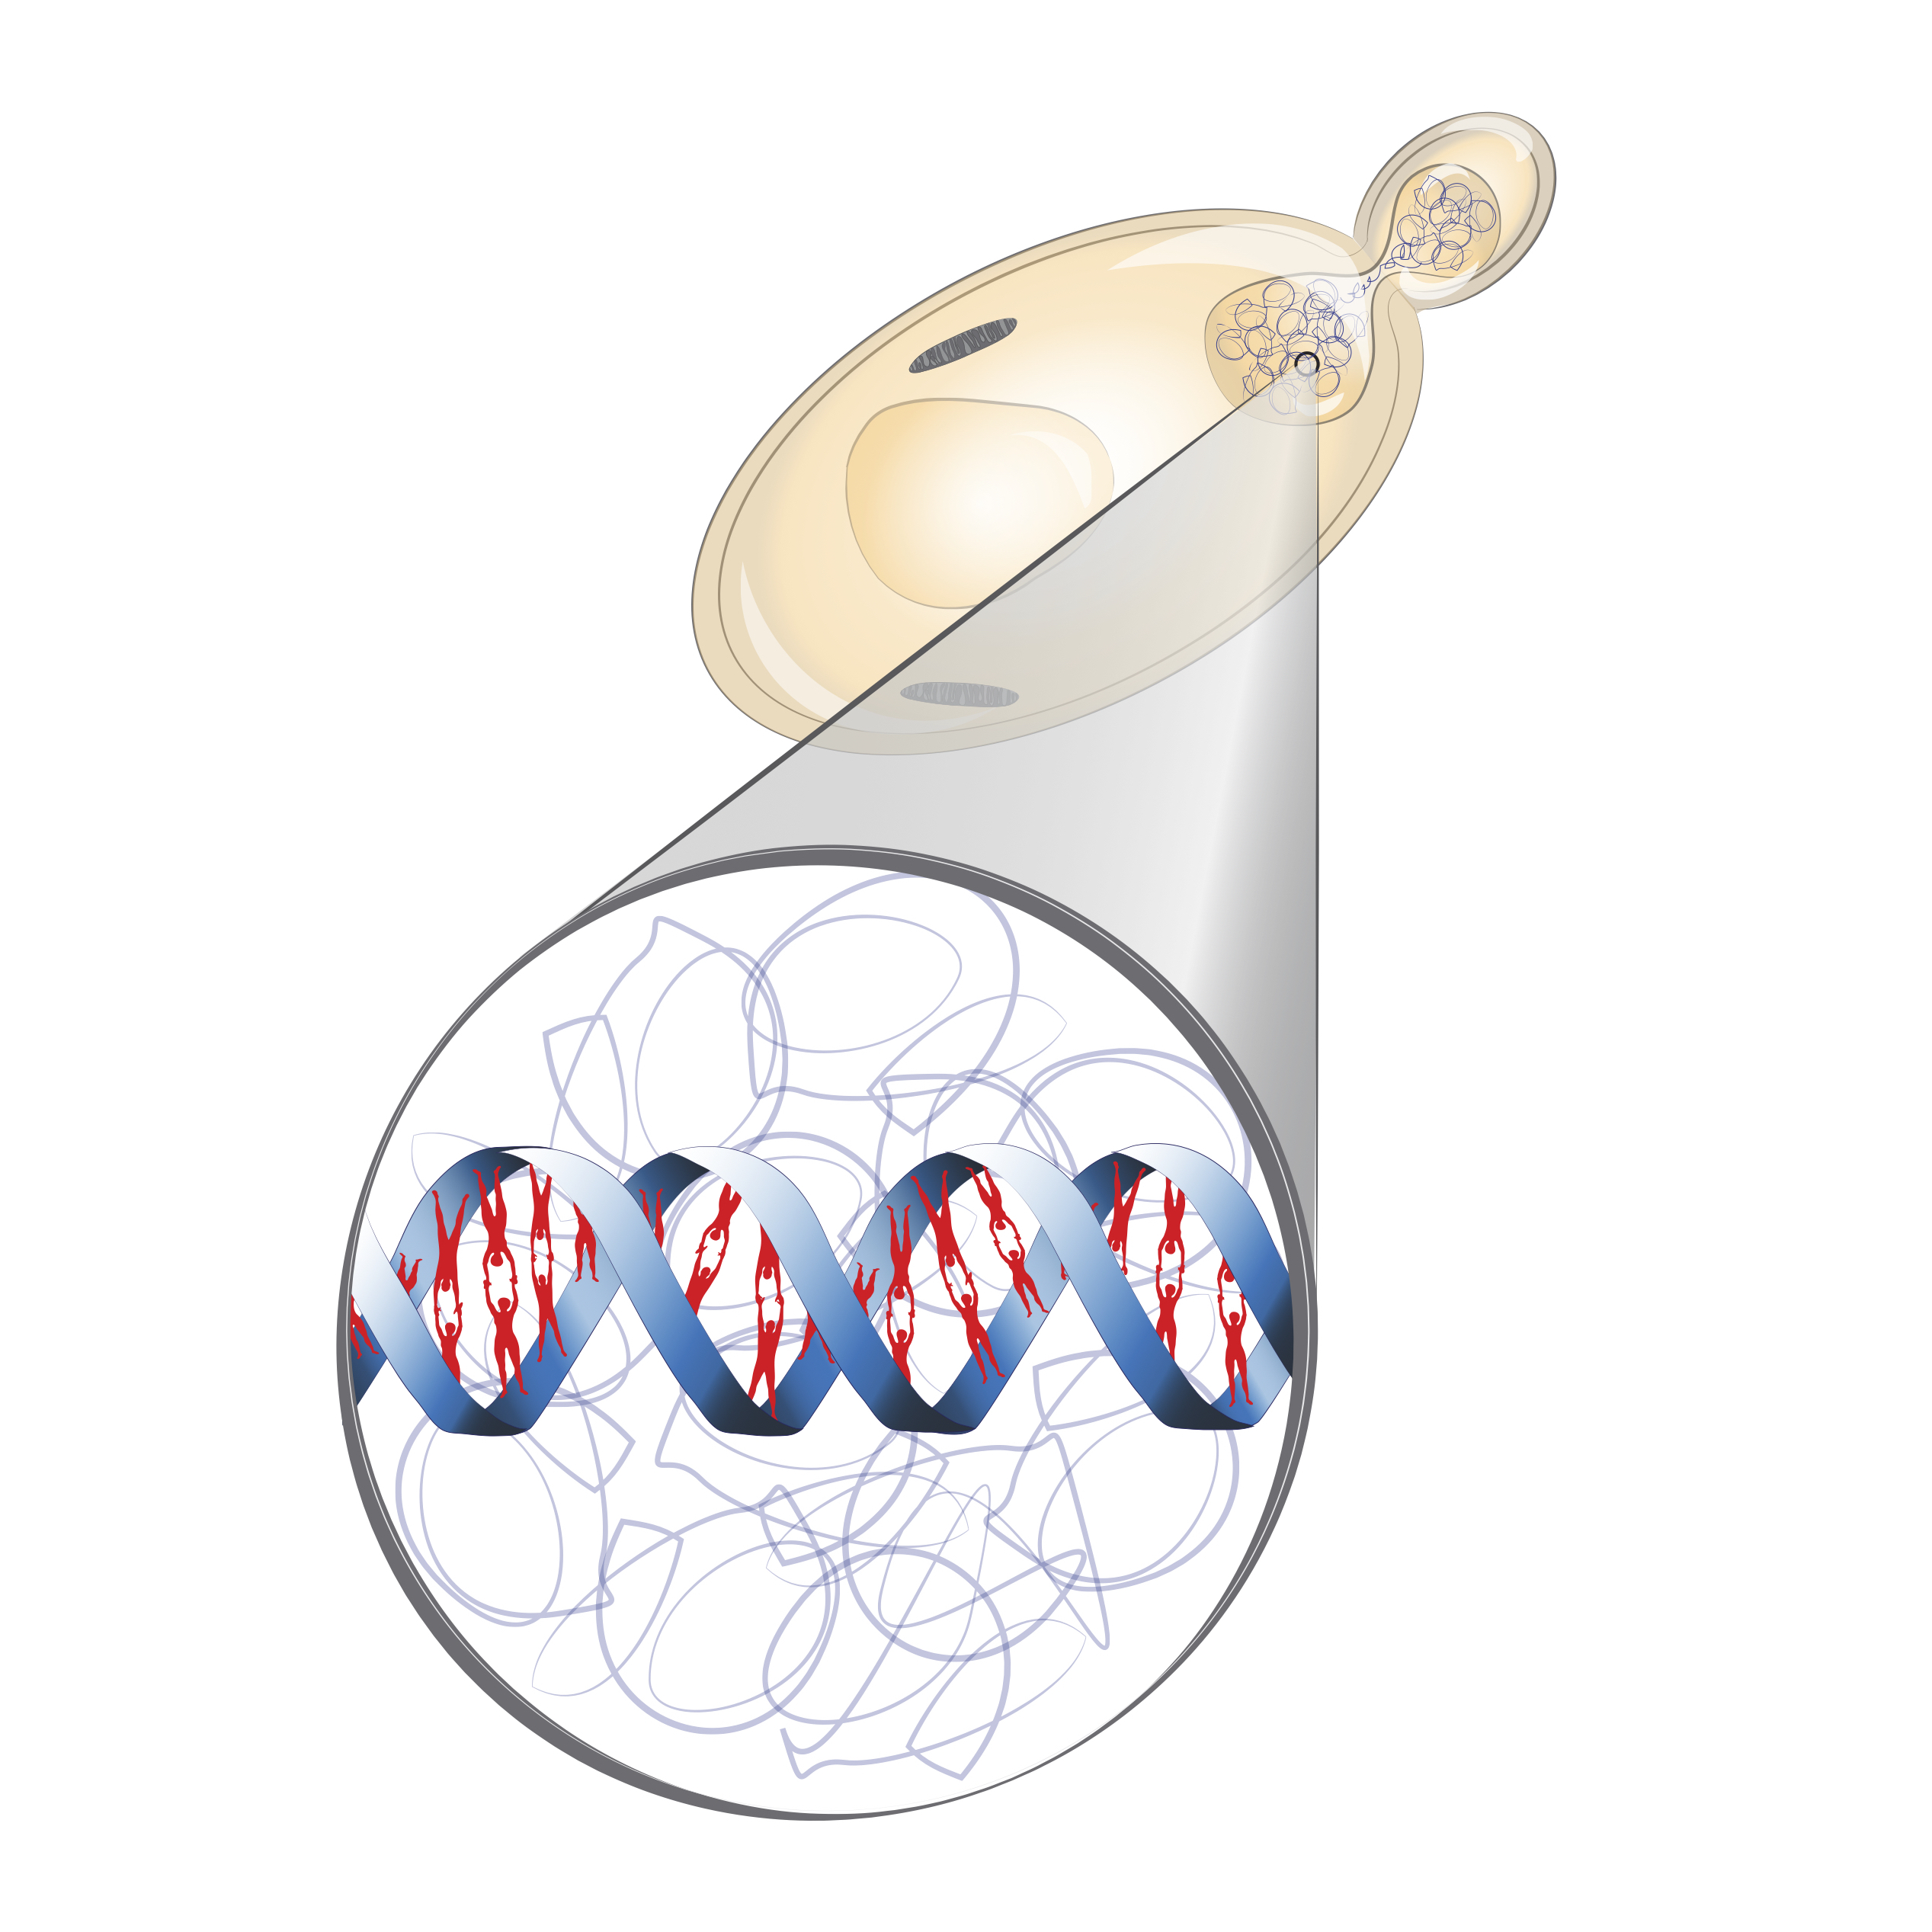 Illustration showing the location of DNA in a yeast cell